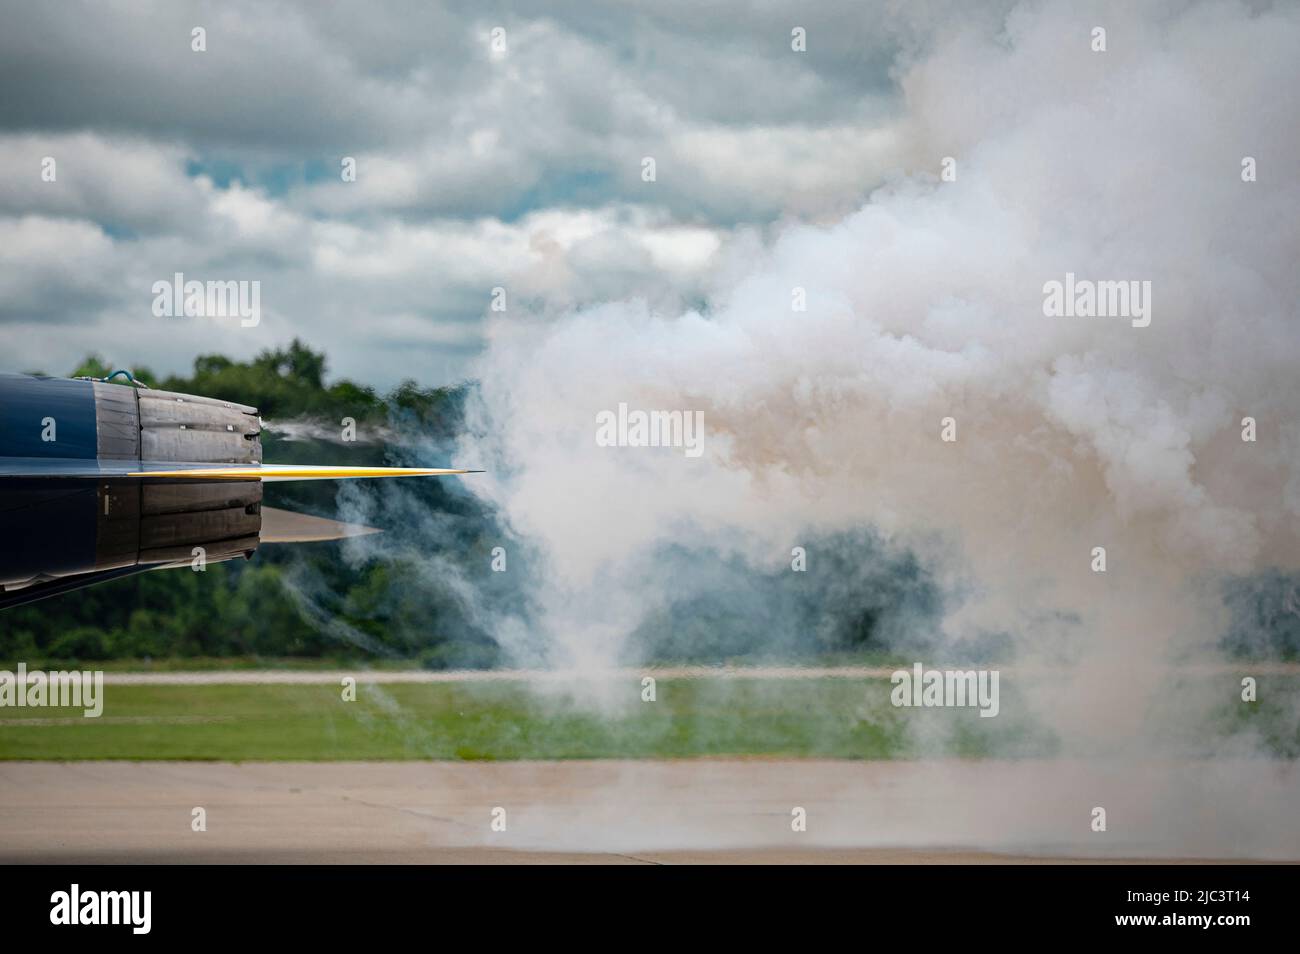 CHESTERFIELD, Mo. (June 8, 2022) Lt. Griffin Stangel, the #7 pilot and narrator of the U.S. Navy flight demonstration team, the Blue Angels, fires up an F/A-18 Super Hornet during a key influencer flight, June 8, 2022. The Blue Angels are in the St. Louis area for the Spirit of St. Louis Airshow, which takes place June 11-12 and marks the St. Louis-made Super Hornet making its debut and return to the area. (U.S. Navy photo by Mass Communication Specialist 1st Class Chris Williamson) Stock Photo